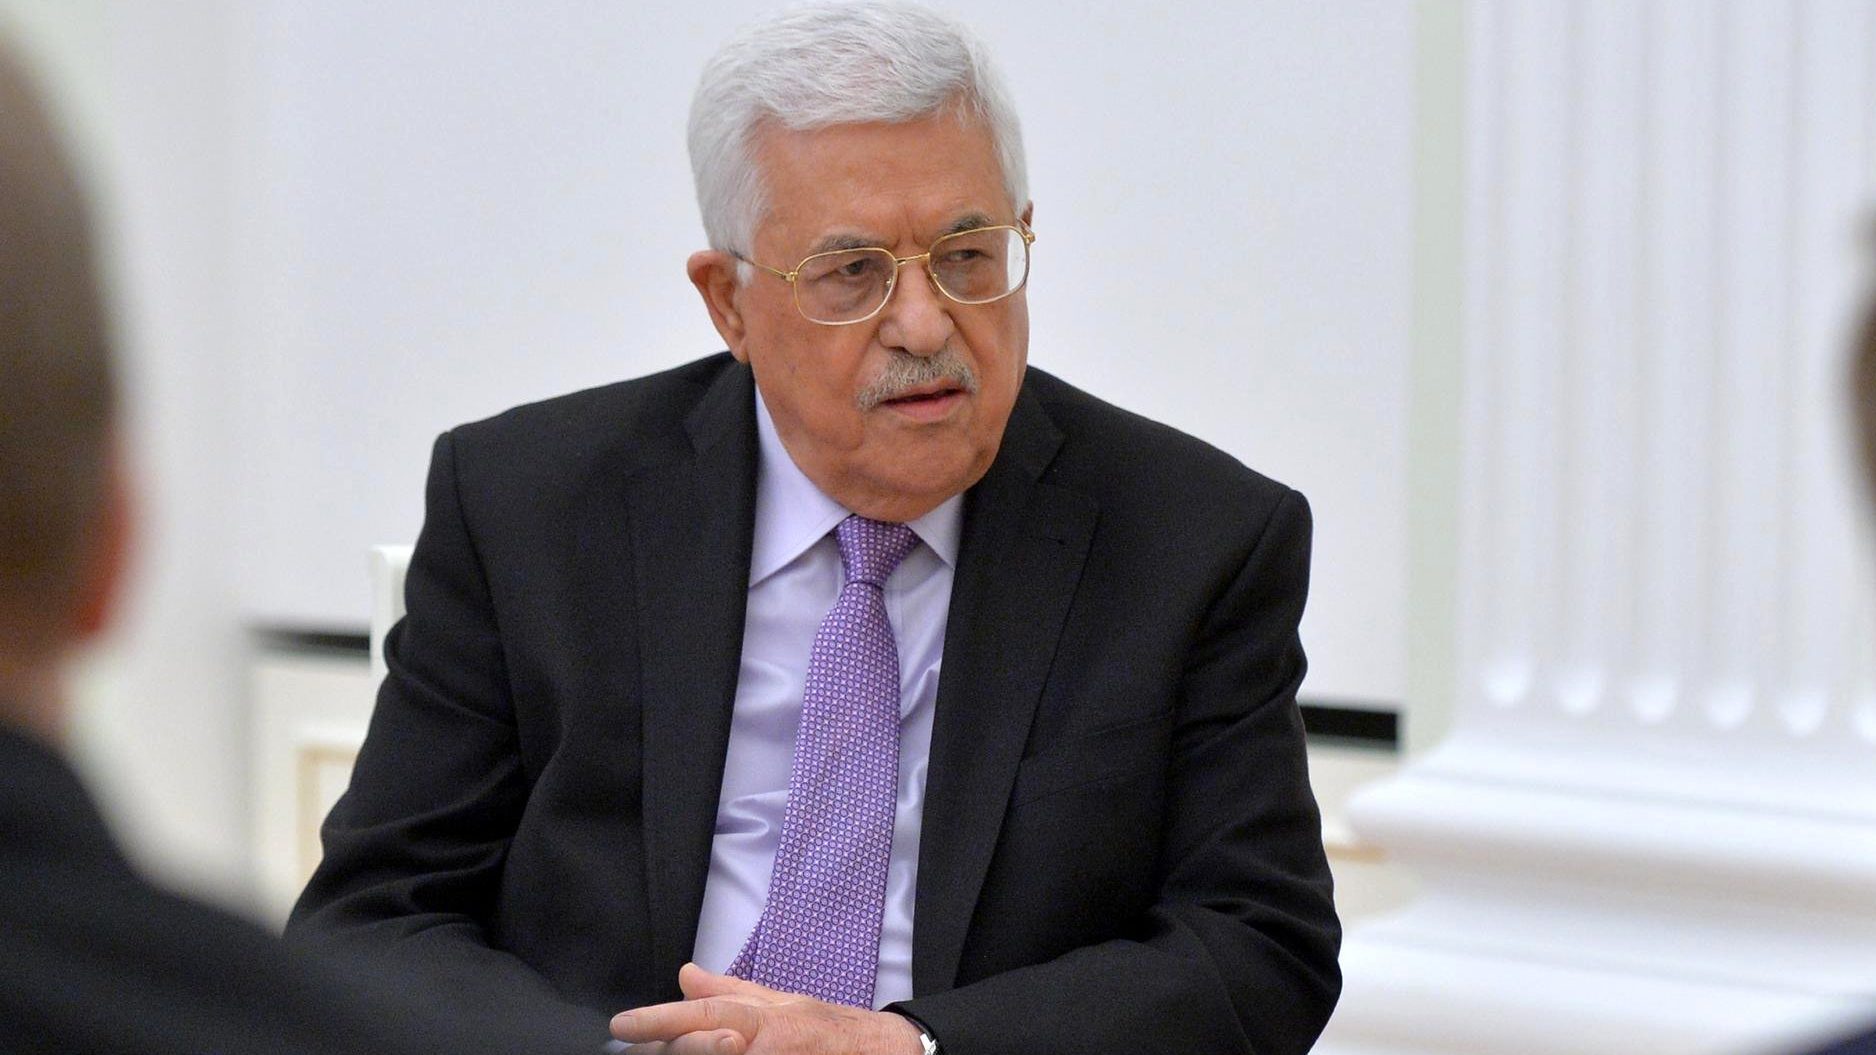 Palestinian Activists Call to Remove Abbas From Office